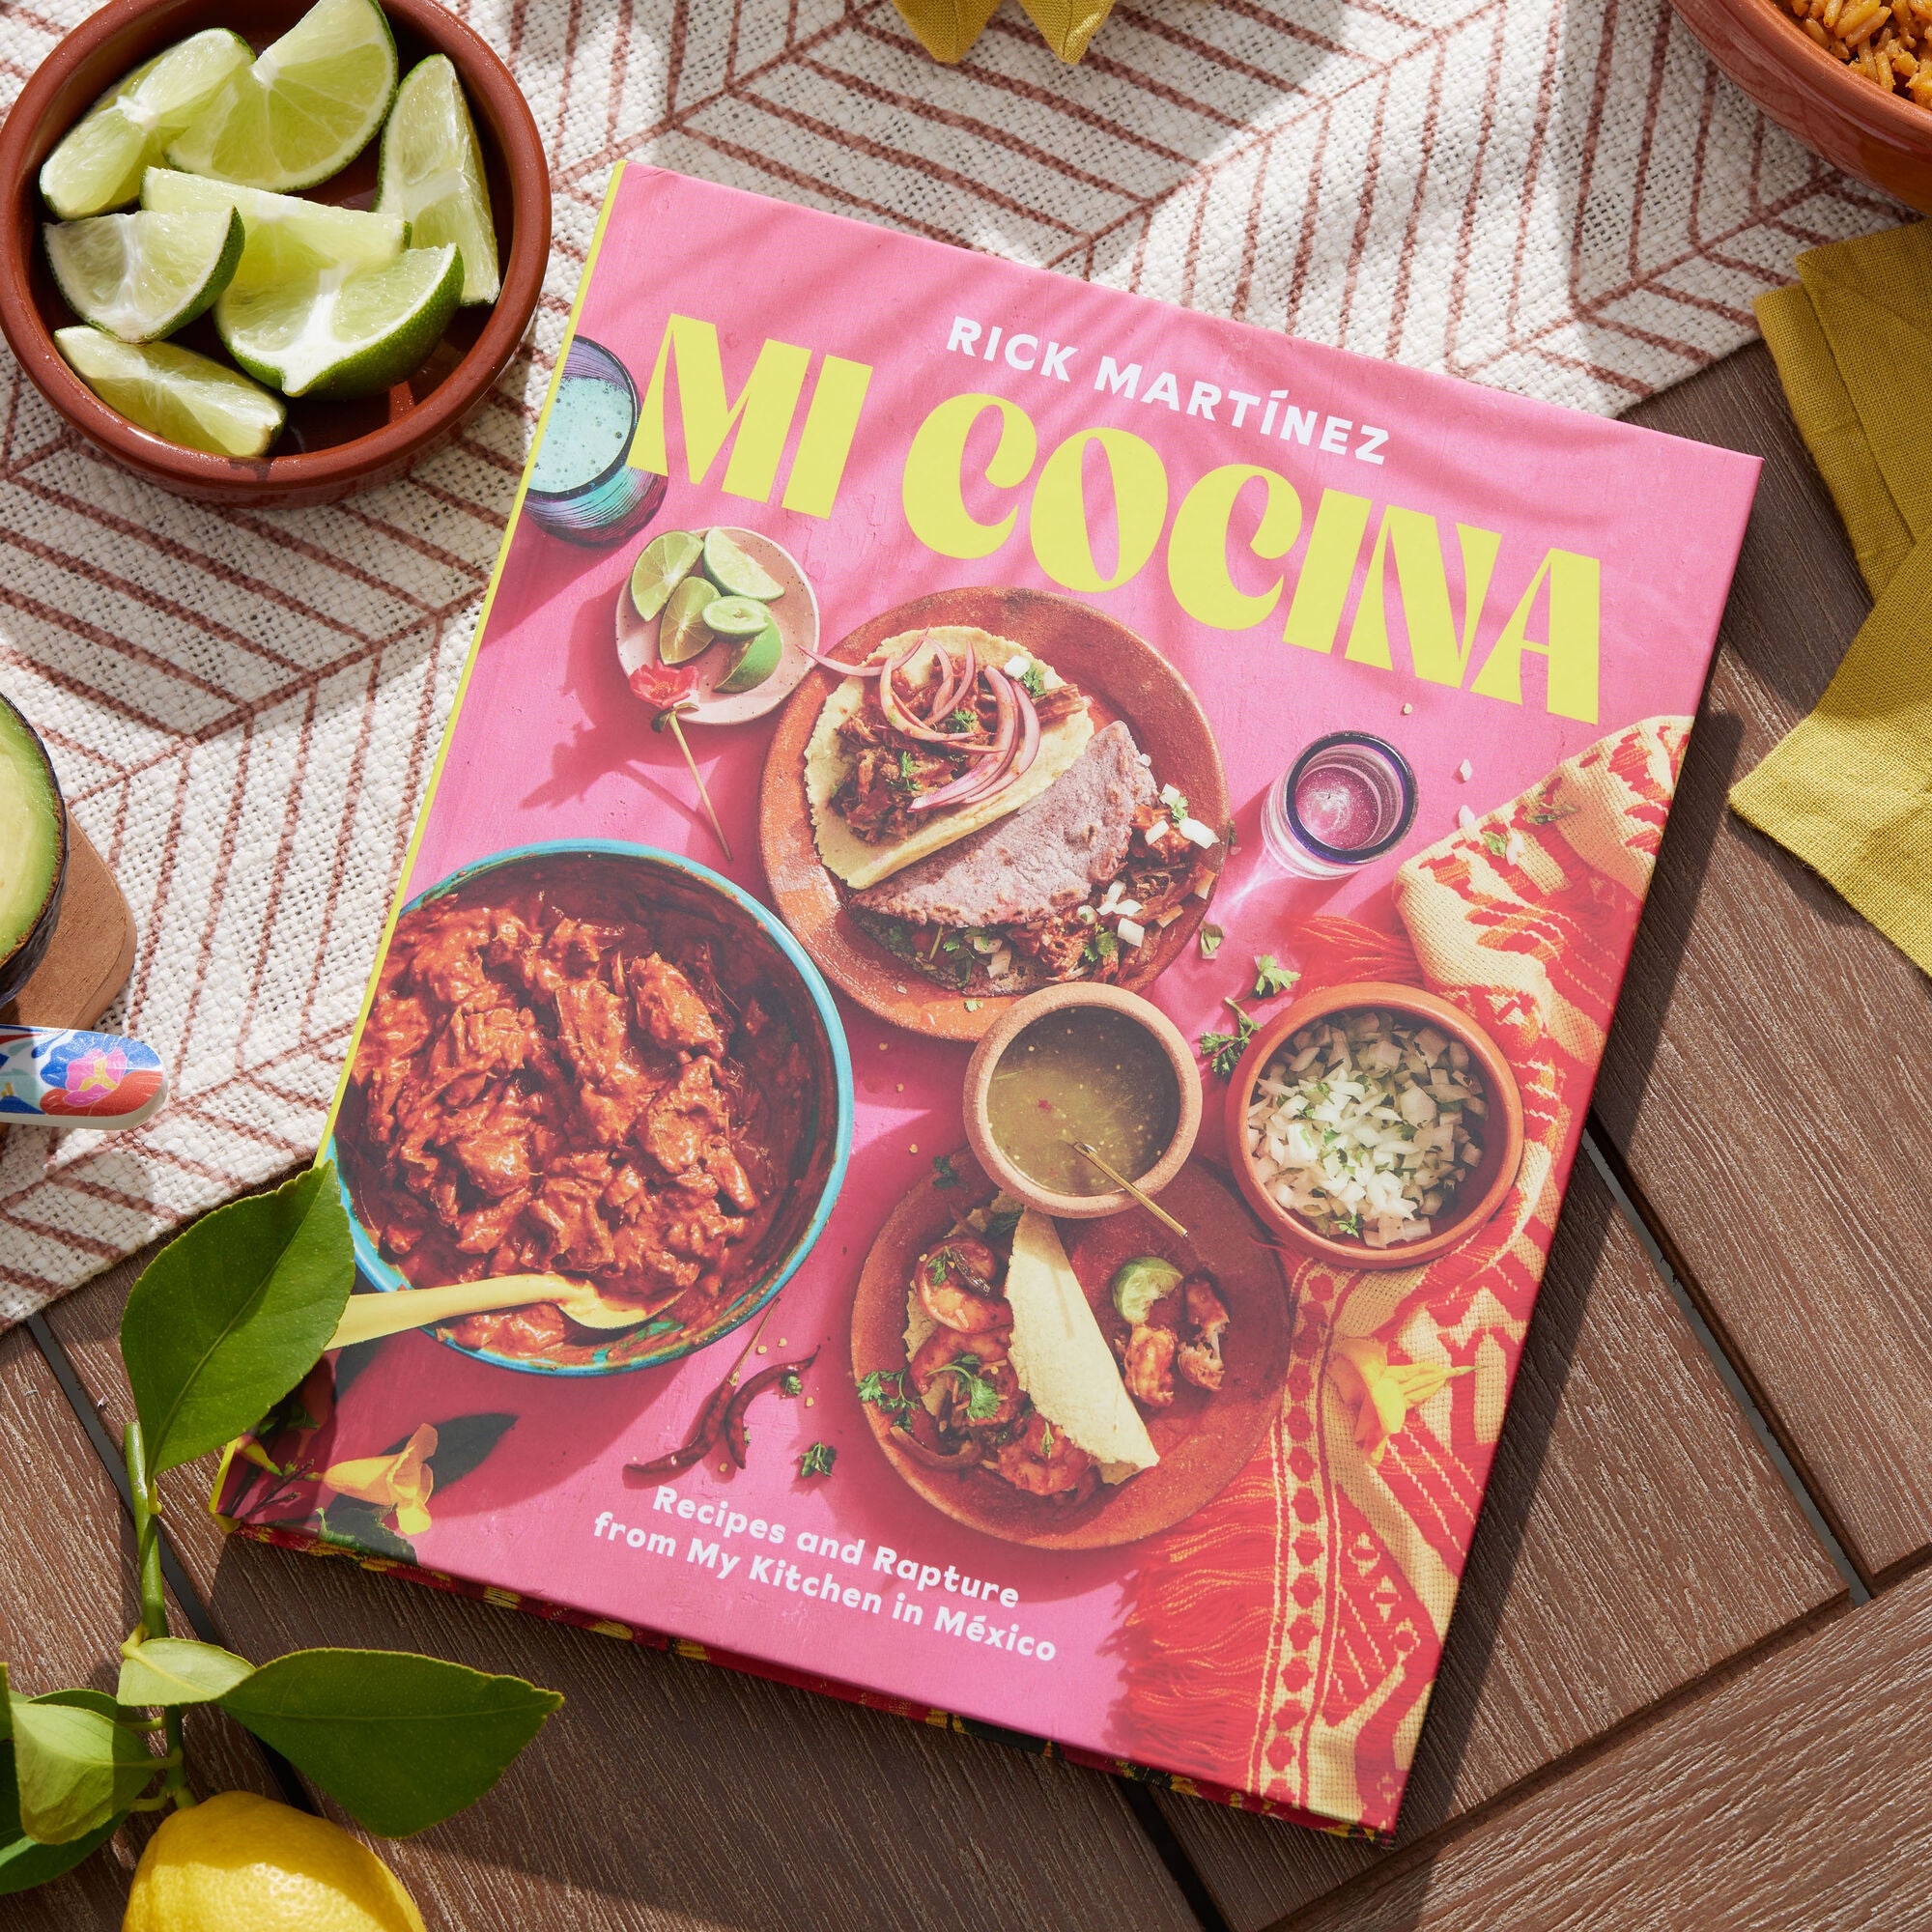 15 Year Mexican Cookbook Set